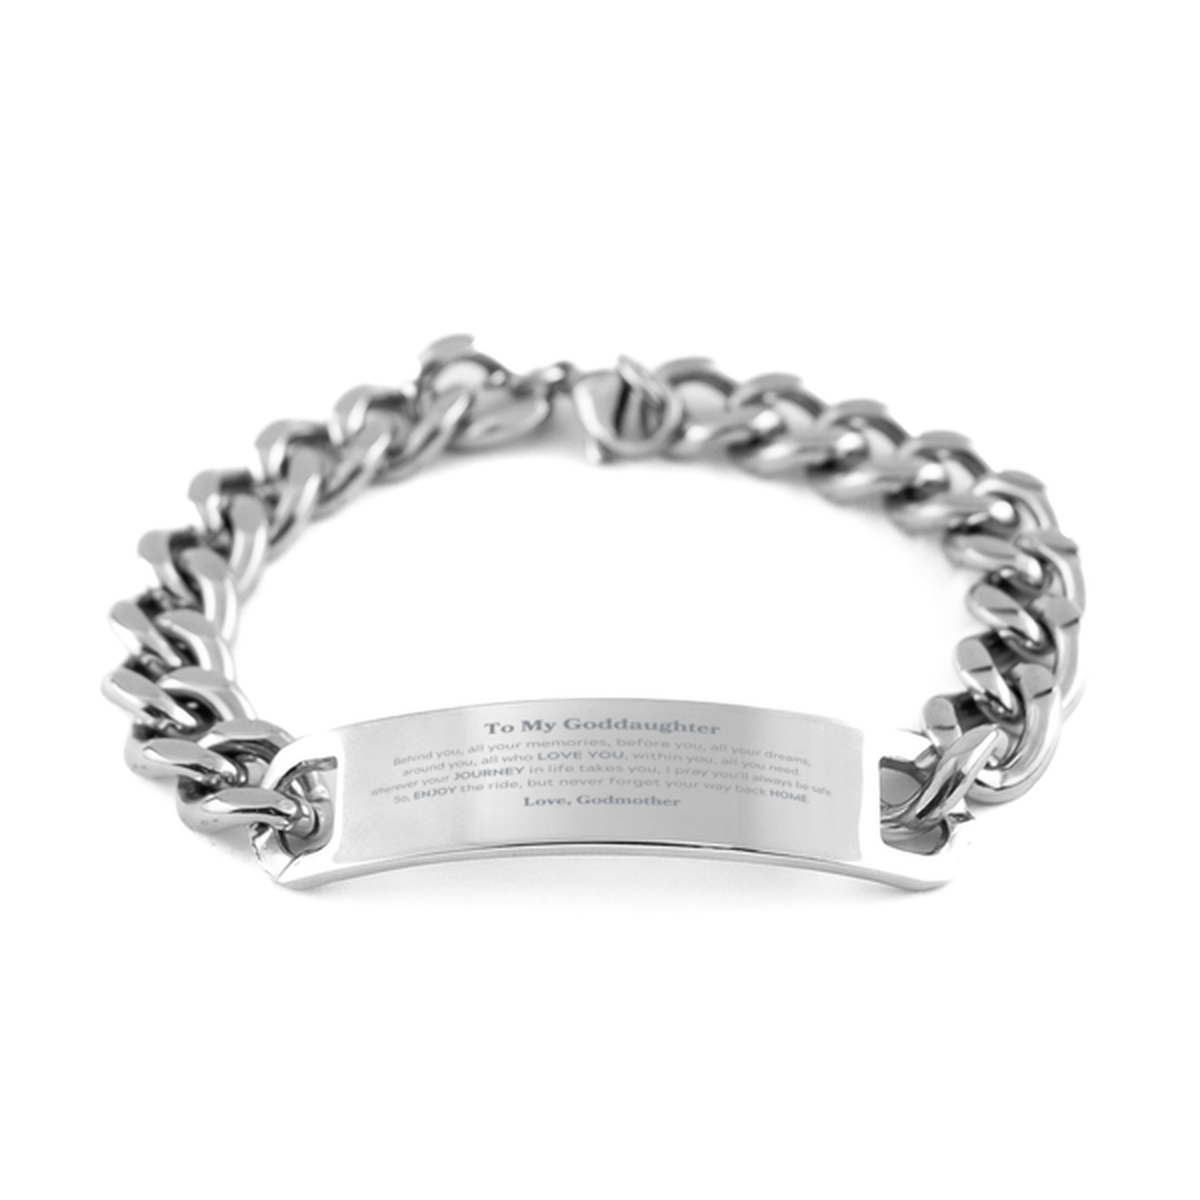 To My Goddaughter Graduation Gifts from Godmother, Goddaughter Cuban Chain Stainless Steel Bracelet Christmas Birthday Gifts for Goddaughter Behind you, all your memories, before you, all your dreams. Love, Godmother